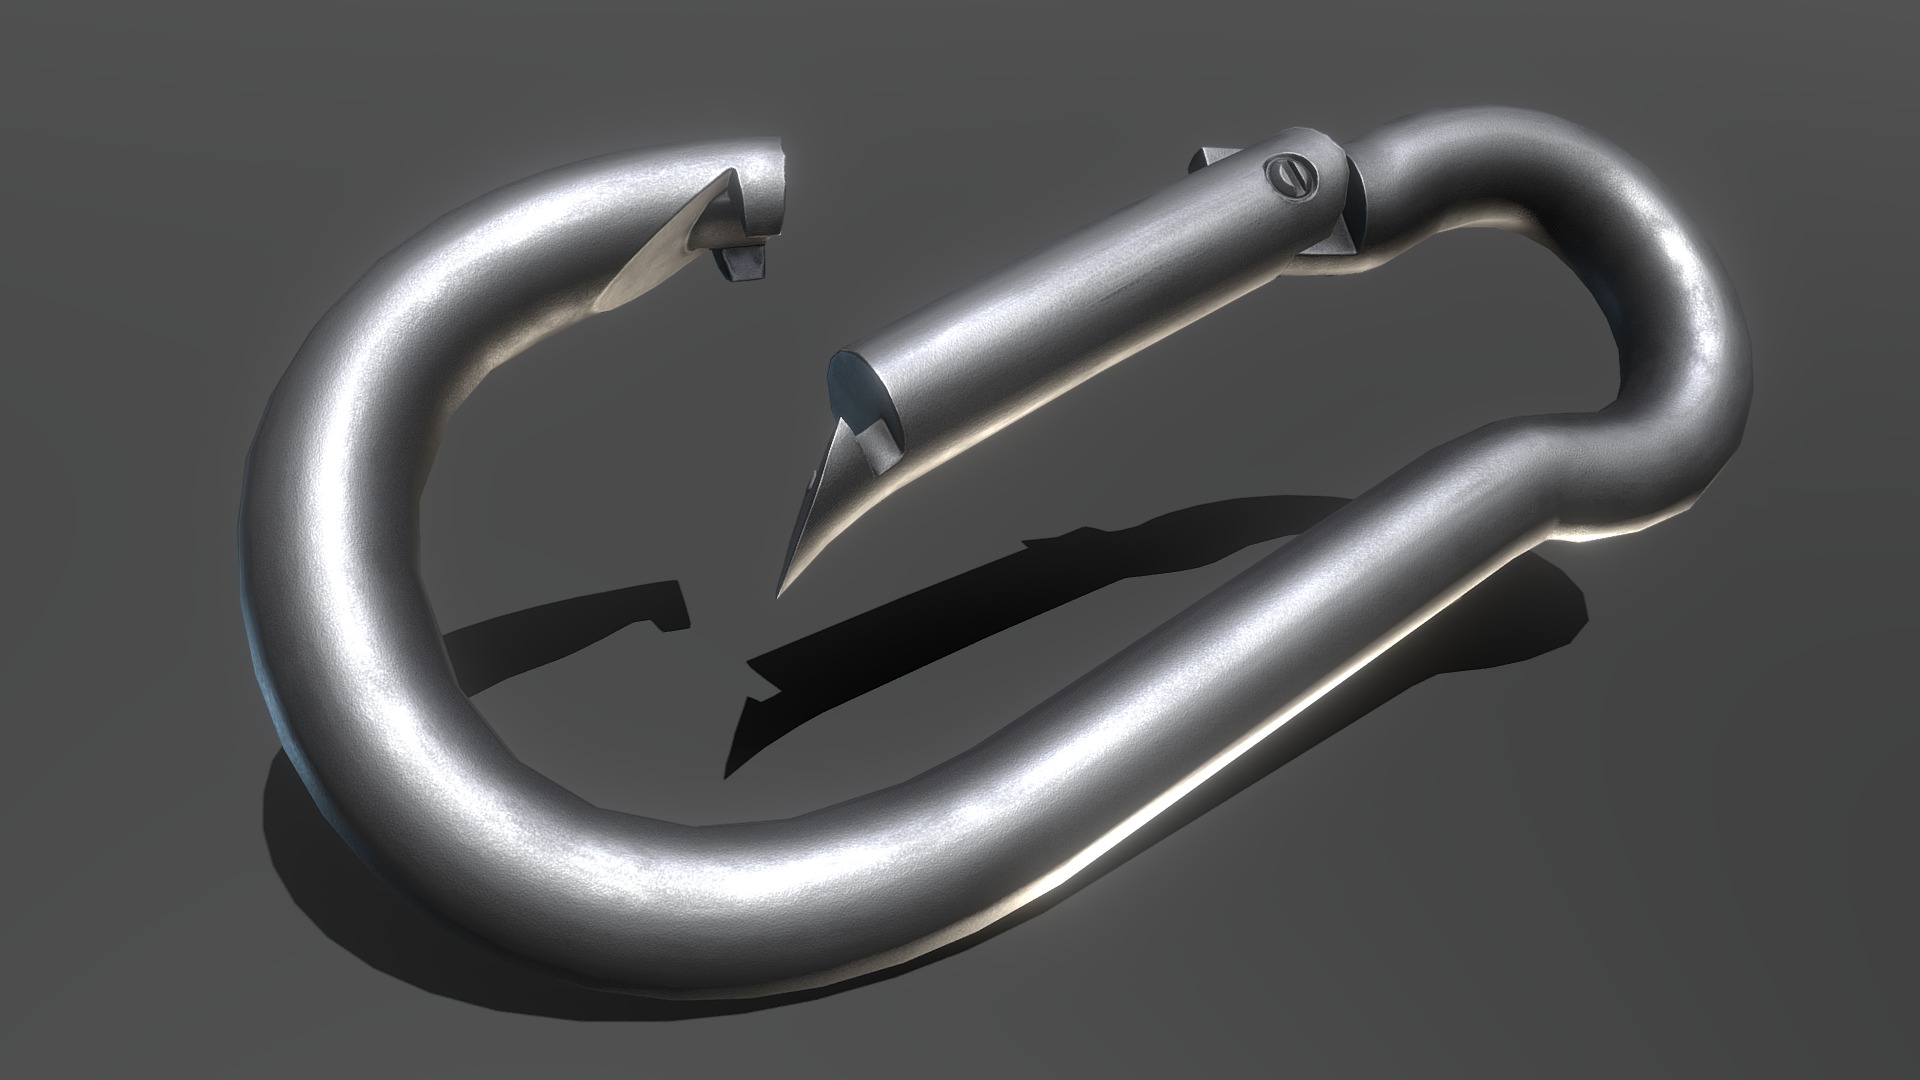 3D model Carabiner – Karabinerhaken (Low-Poly) - This is a 3D model of the Carabiner - Karabinerhaken (Low-Poly). The 3D model is about a metal circular object.